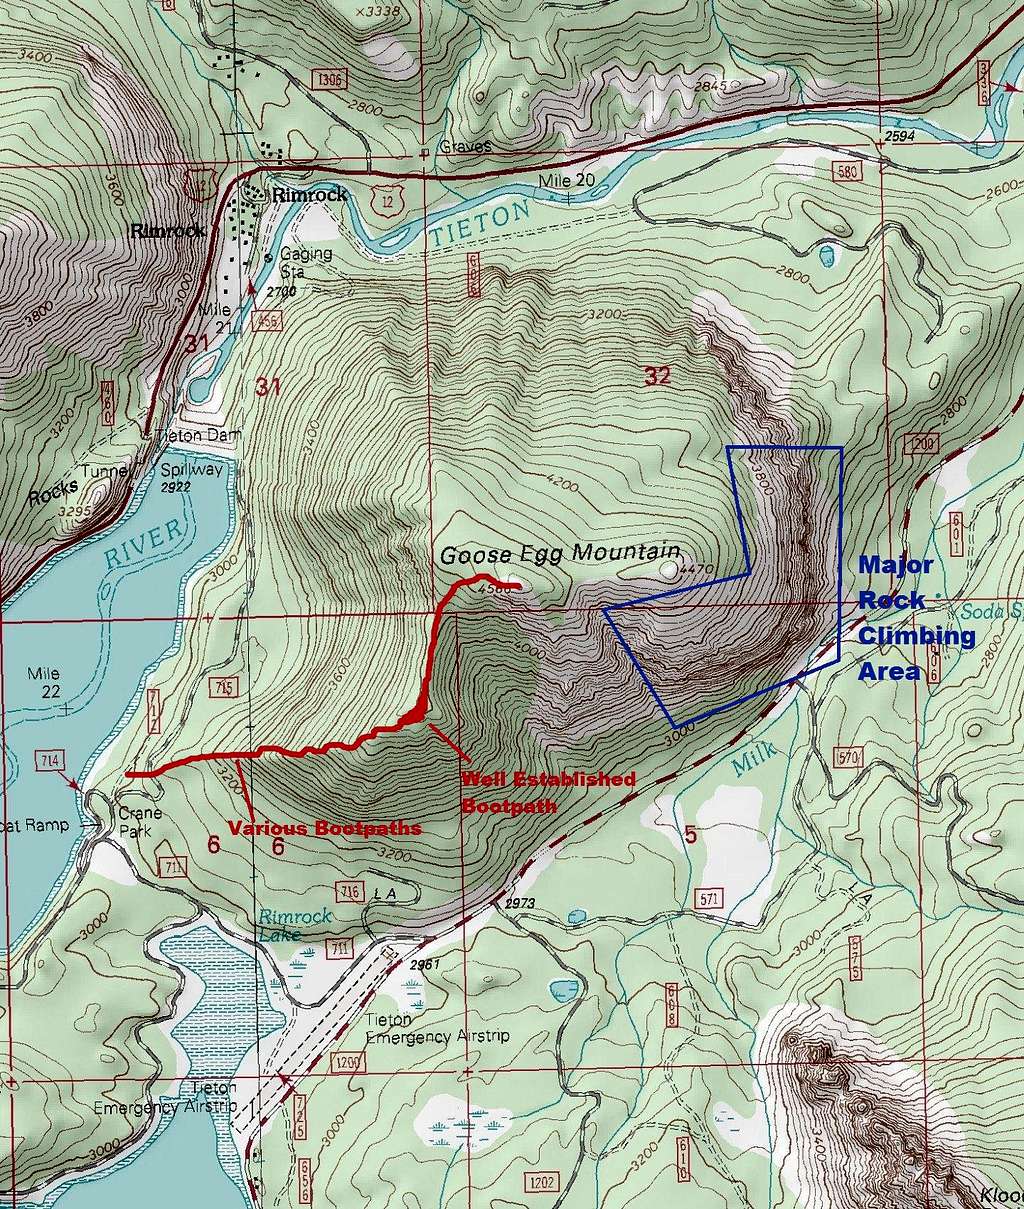 Map of the route and the rock climbing area